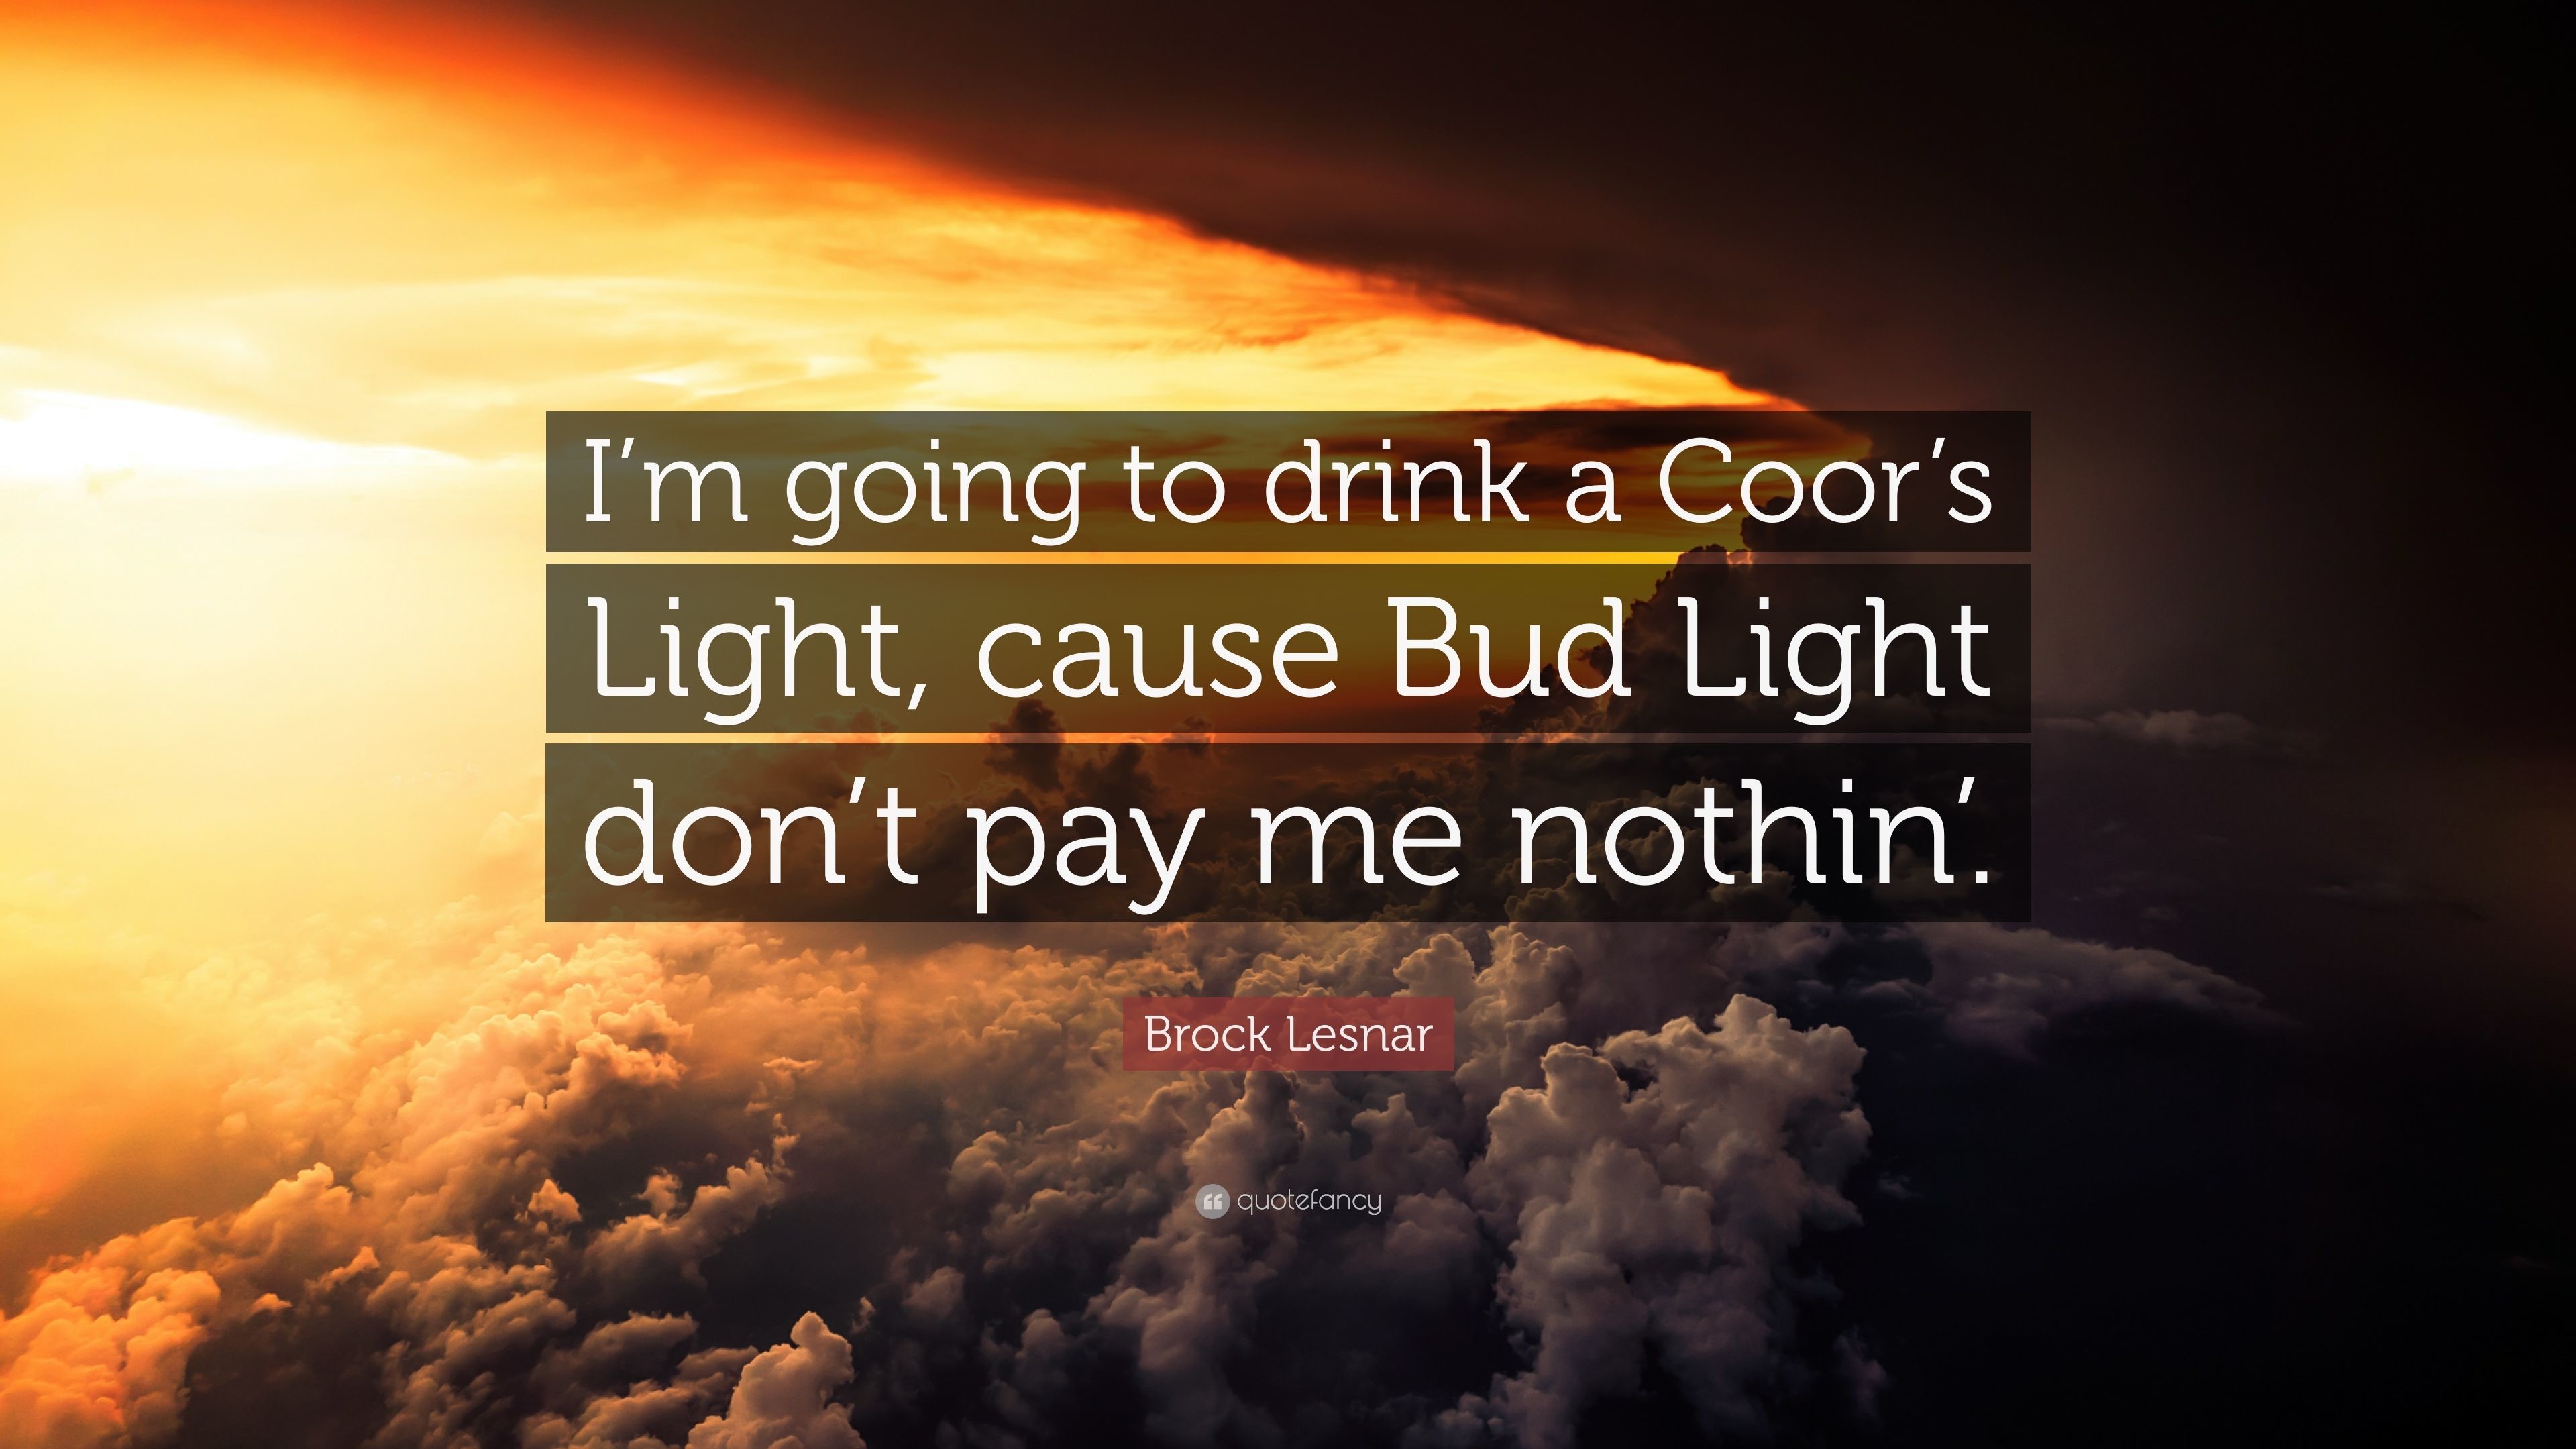 3840x2160 Brock Lesnar Quote: “I'm going to drink a Coor's Light, cause